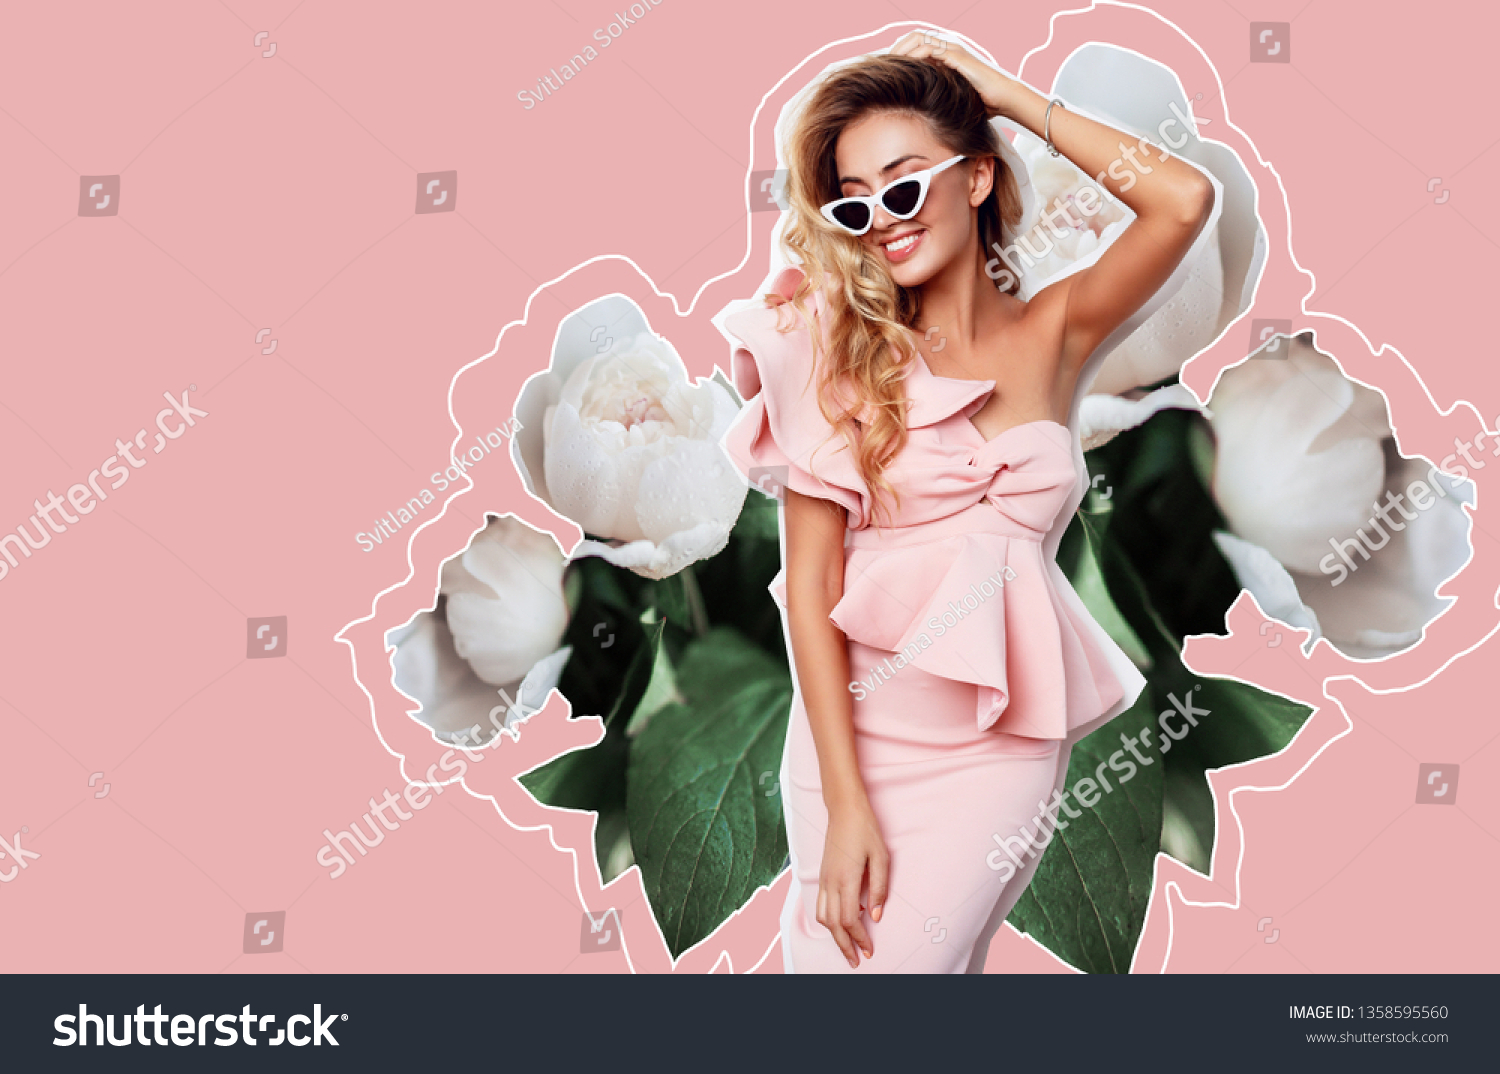 Fashion  collage  image of gorgeous elegant woman in pink dress and sunglasses. White pions on background.  #1358595560